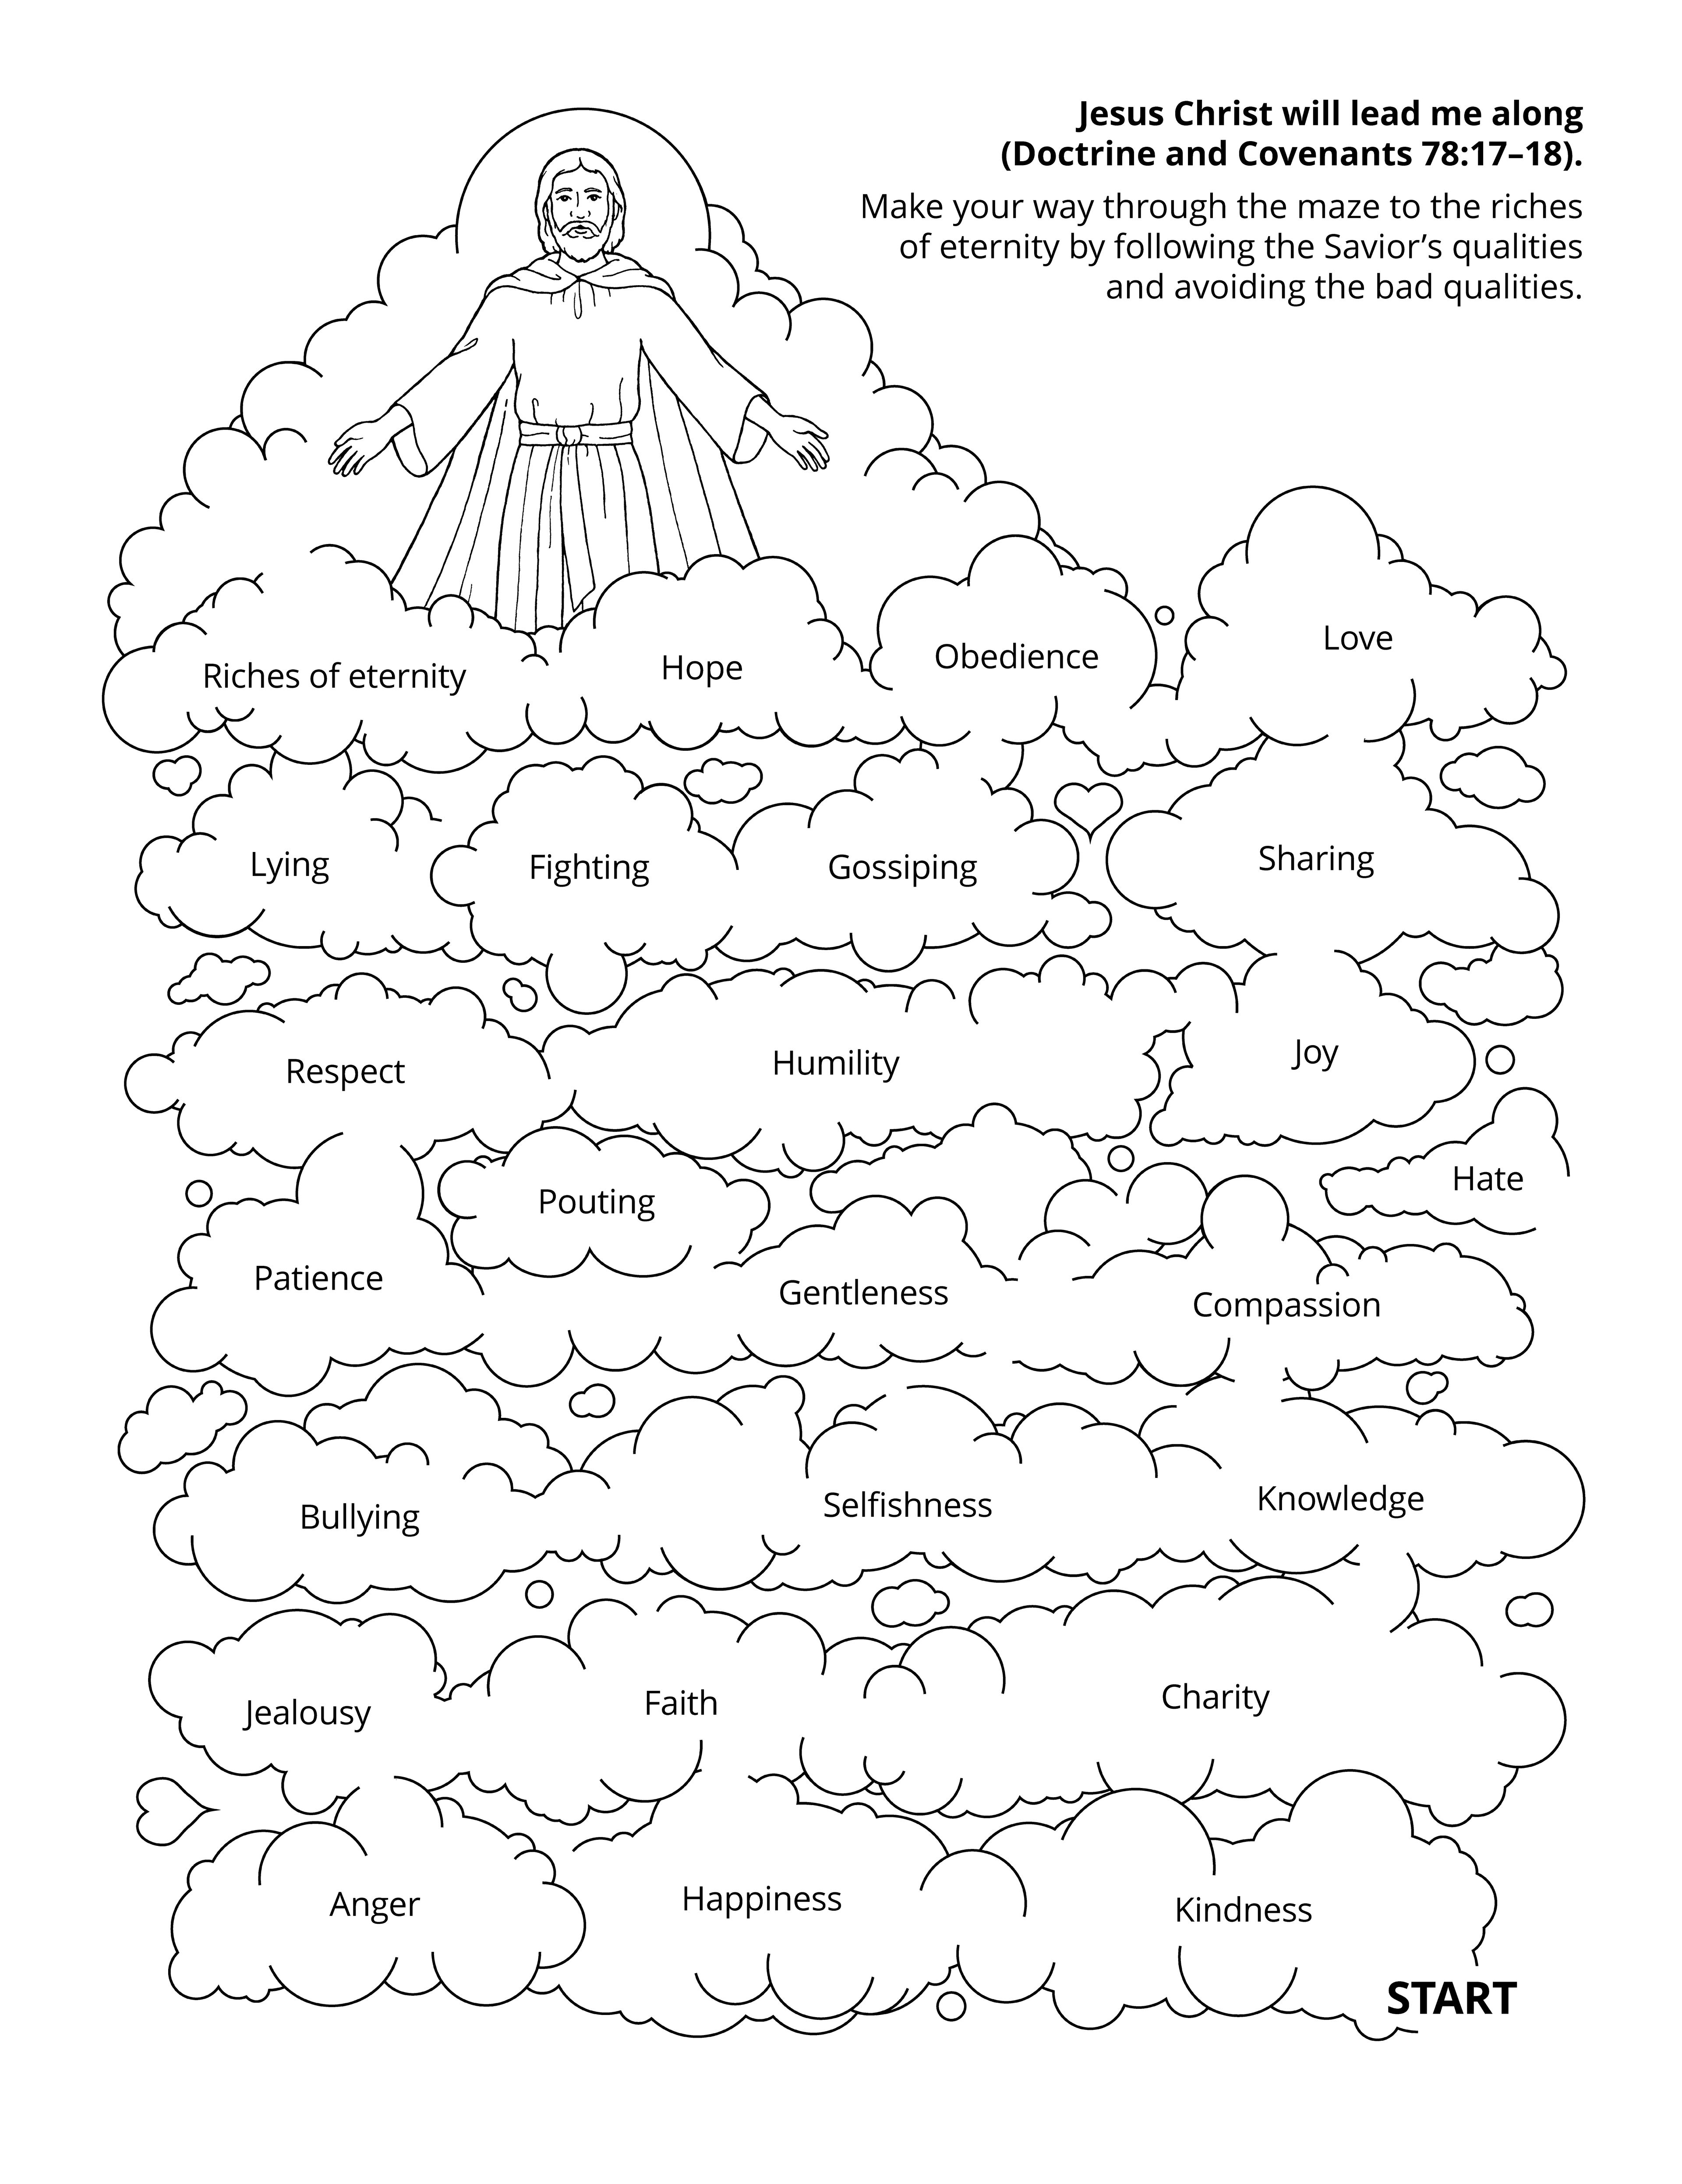 Line art drawing of clouds that depicts ascending to Jesus.